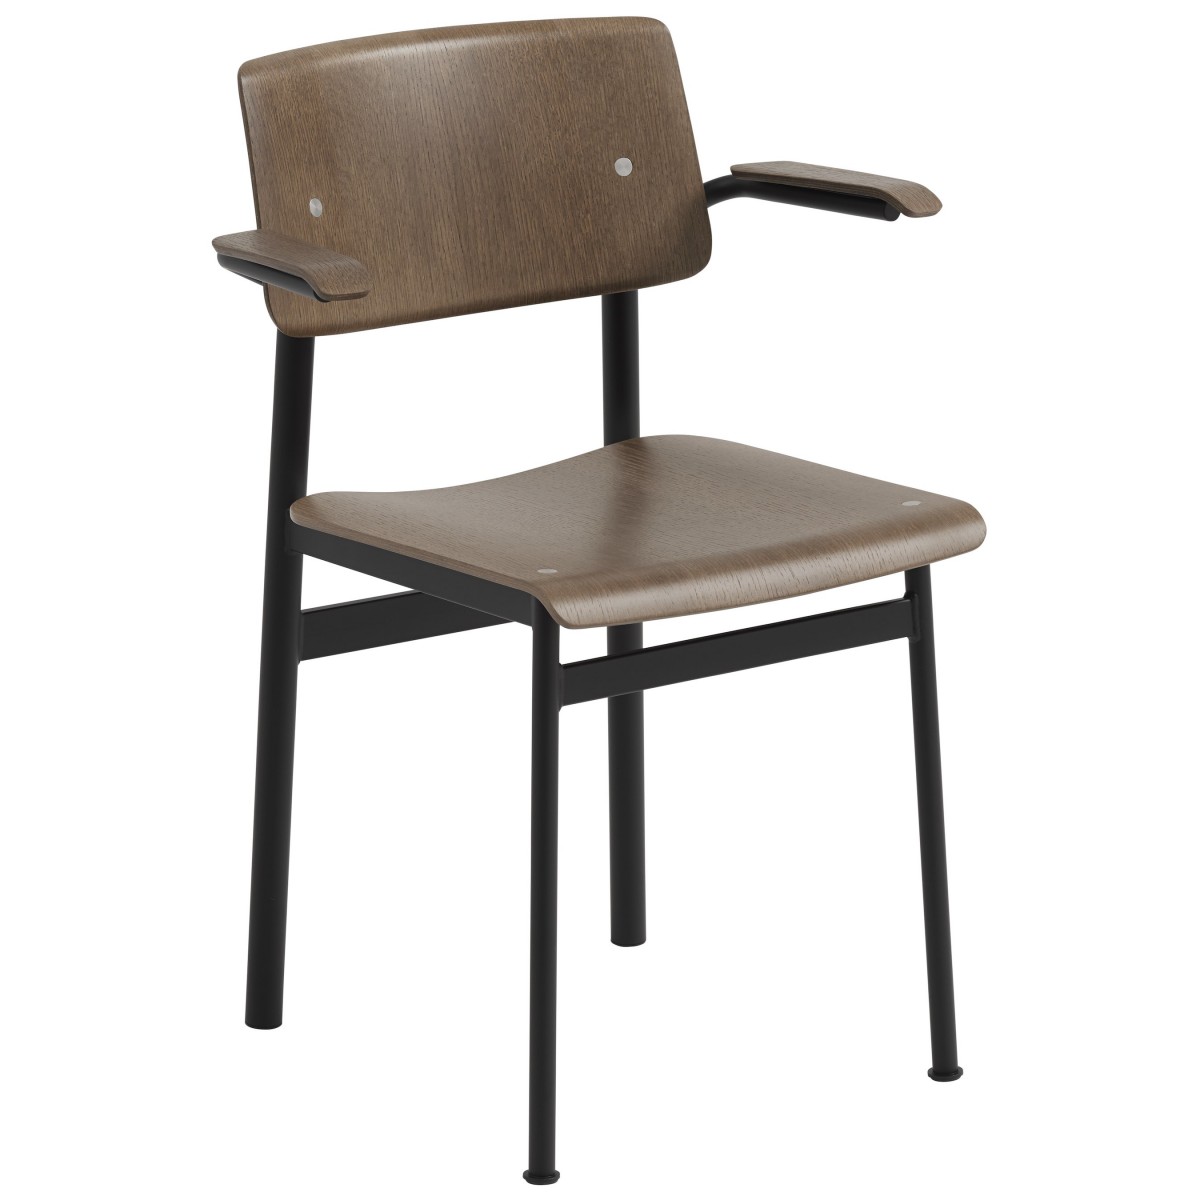 stained dark brown / black - Loft chair with armrests